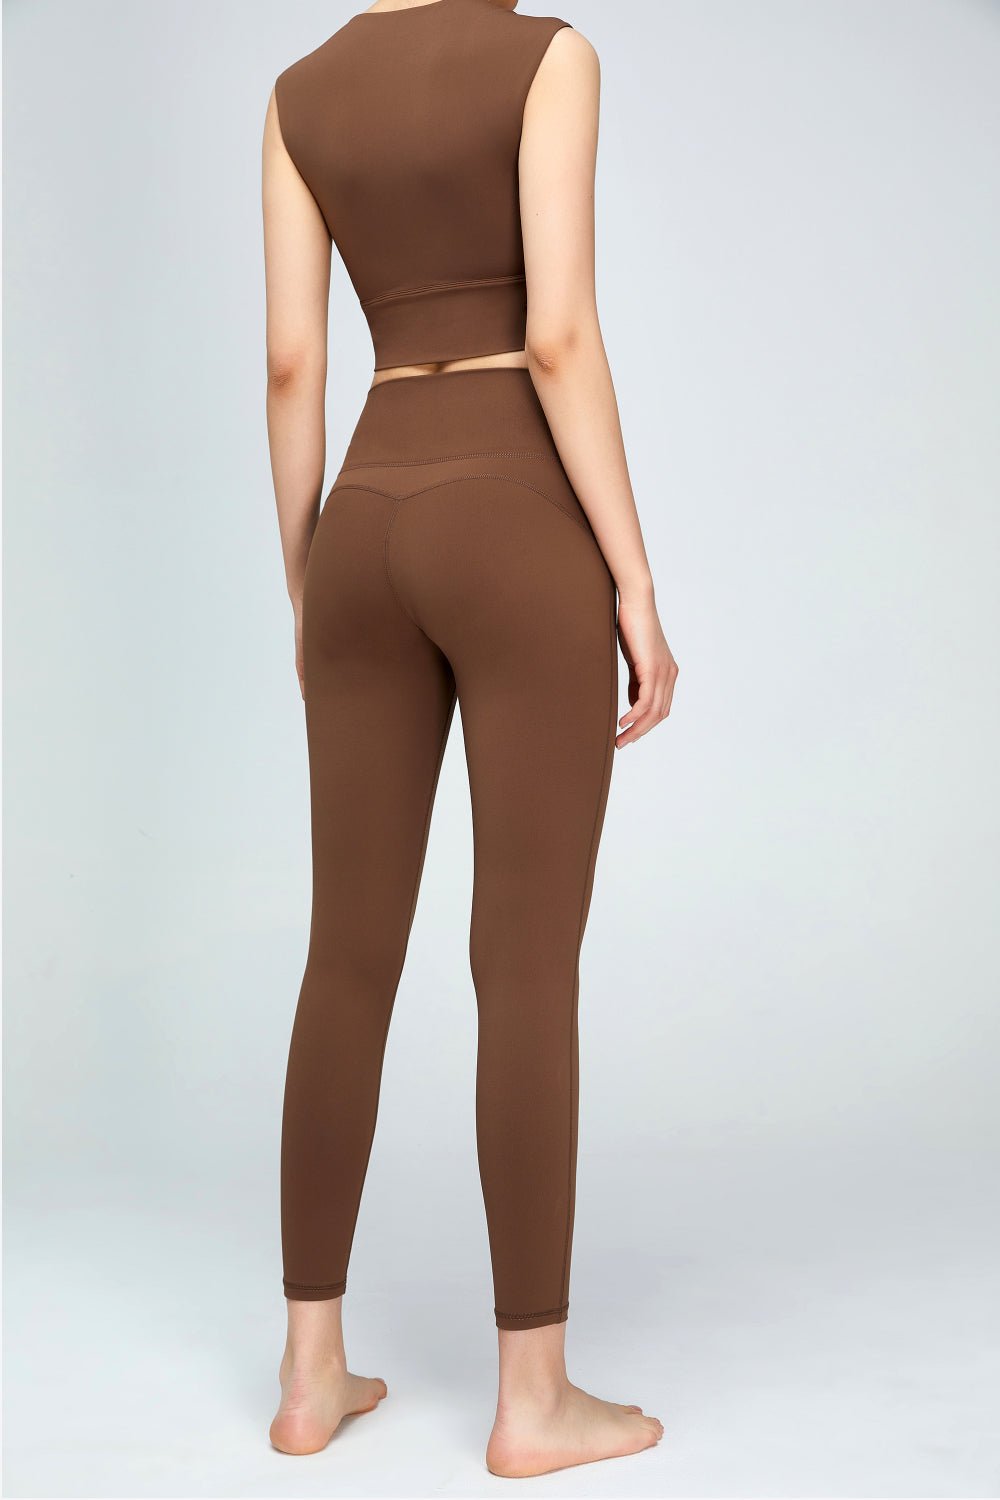 Enchanting Beauty - Ignite Your Inner Grace with our V-Waist Sports Leggings - Contours Flawlessly to your Body. - Guy Christopher